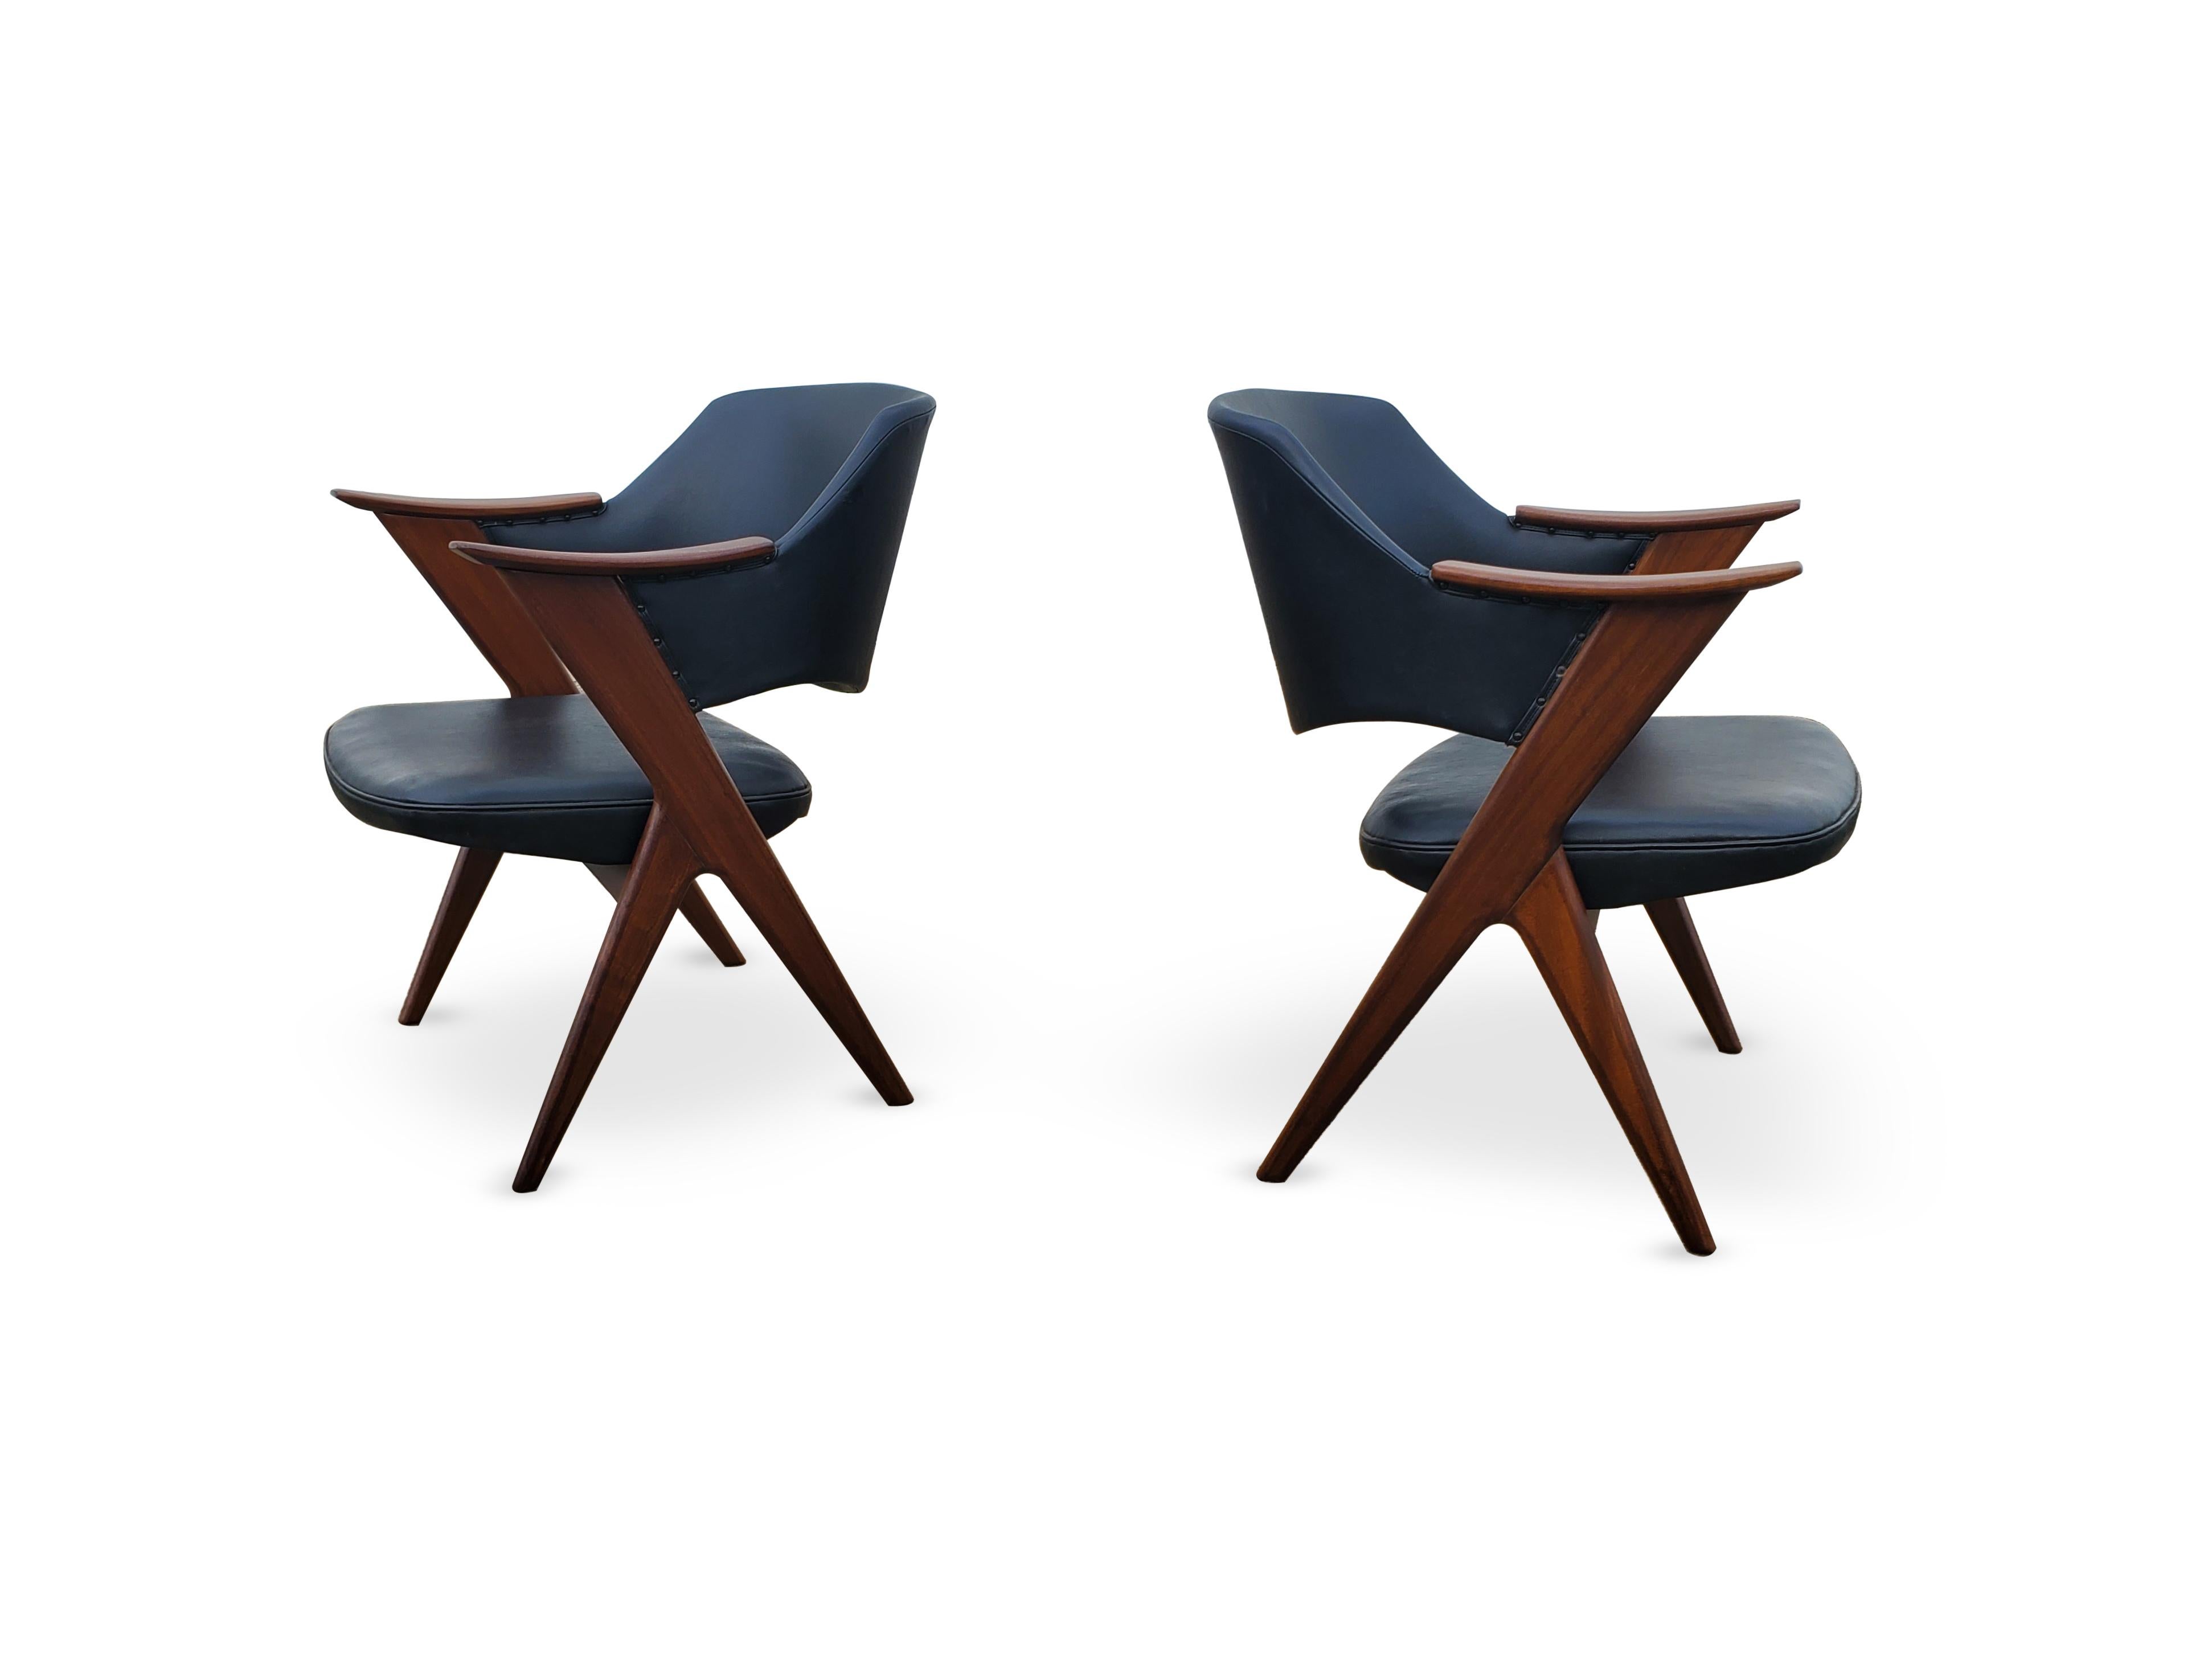 Pair of 'Blinken' Chairs by Rastad & Relling for Hjellegjerde Mobler, Norway In Good Condition For Sale In Middlesex, NJ